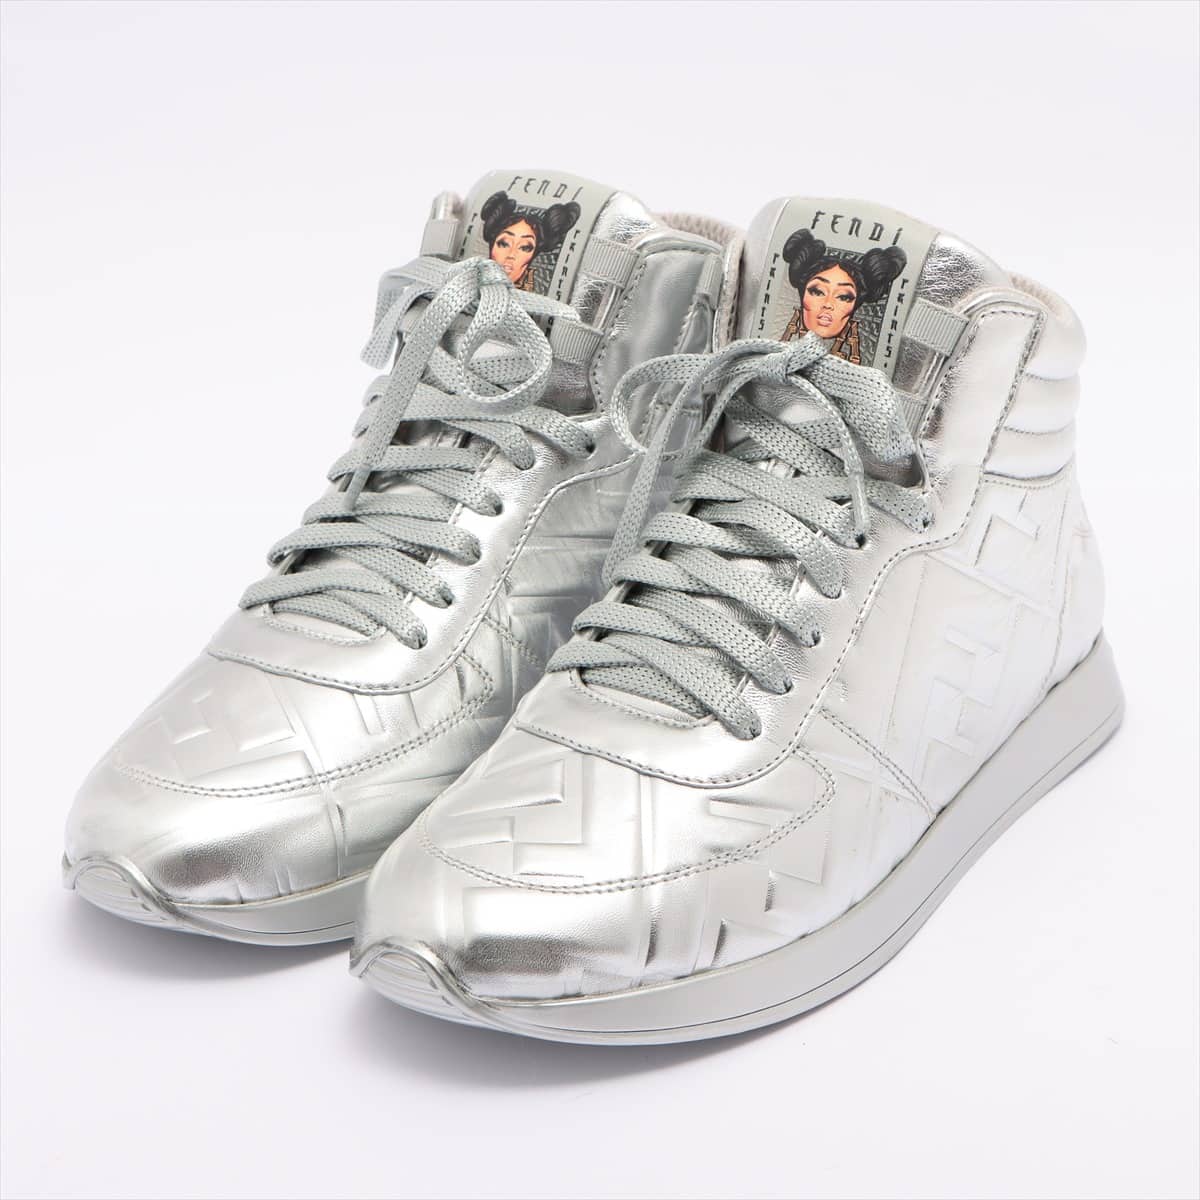 Fendi ZUCCa Leather High-top Sneakers 36 Ladies' Silver 8E7045